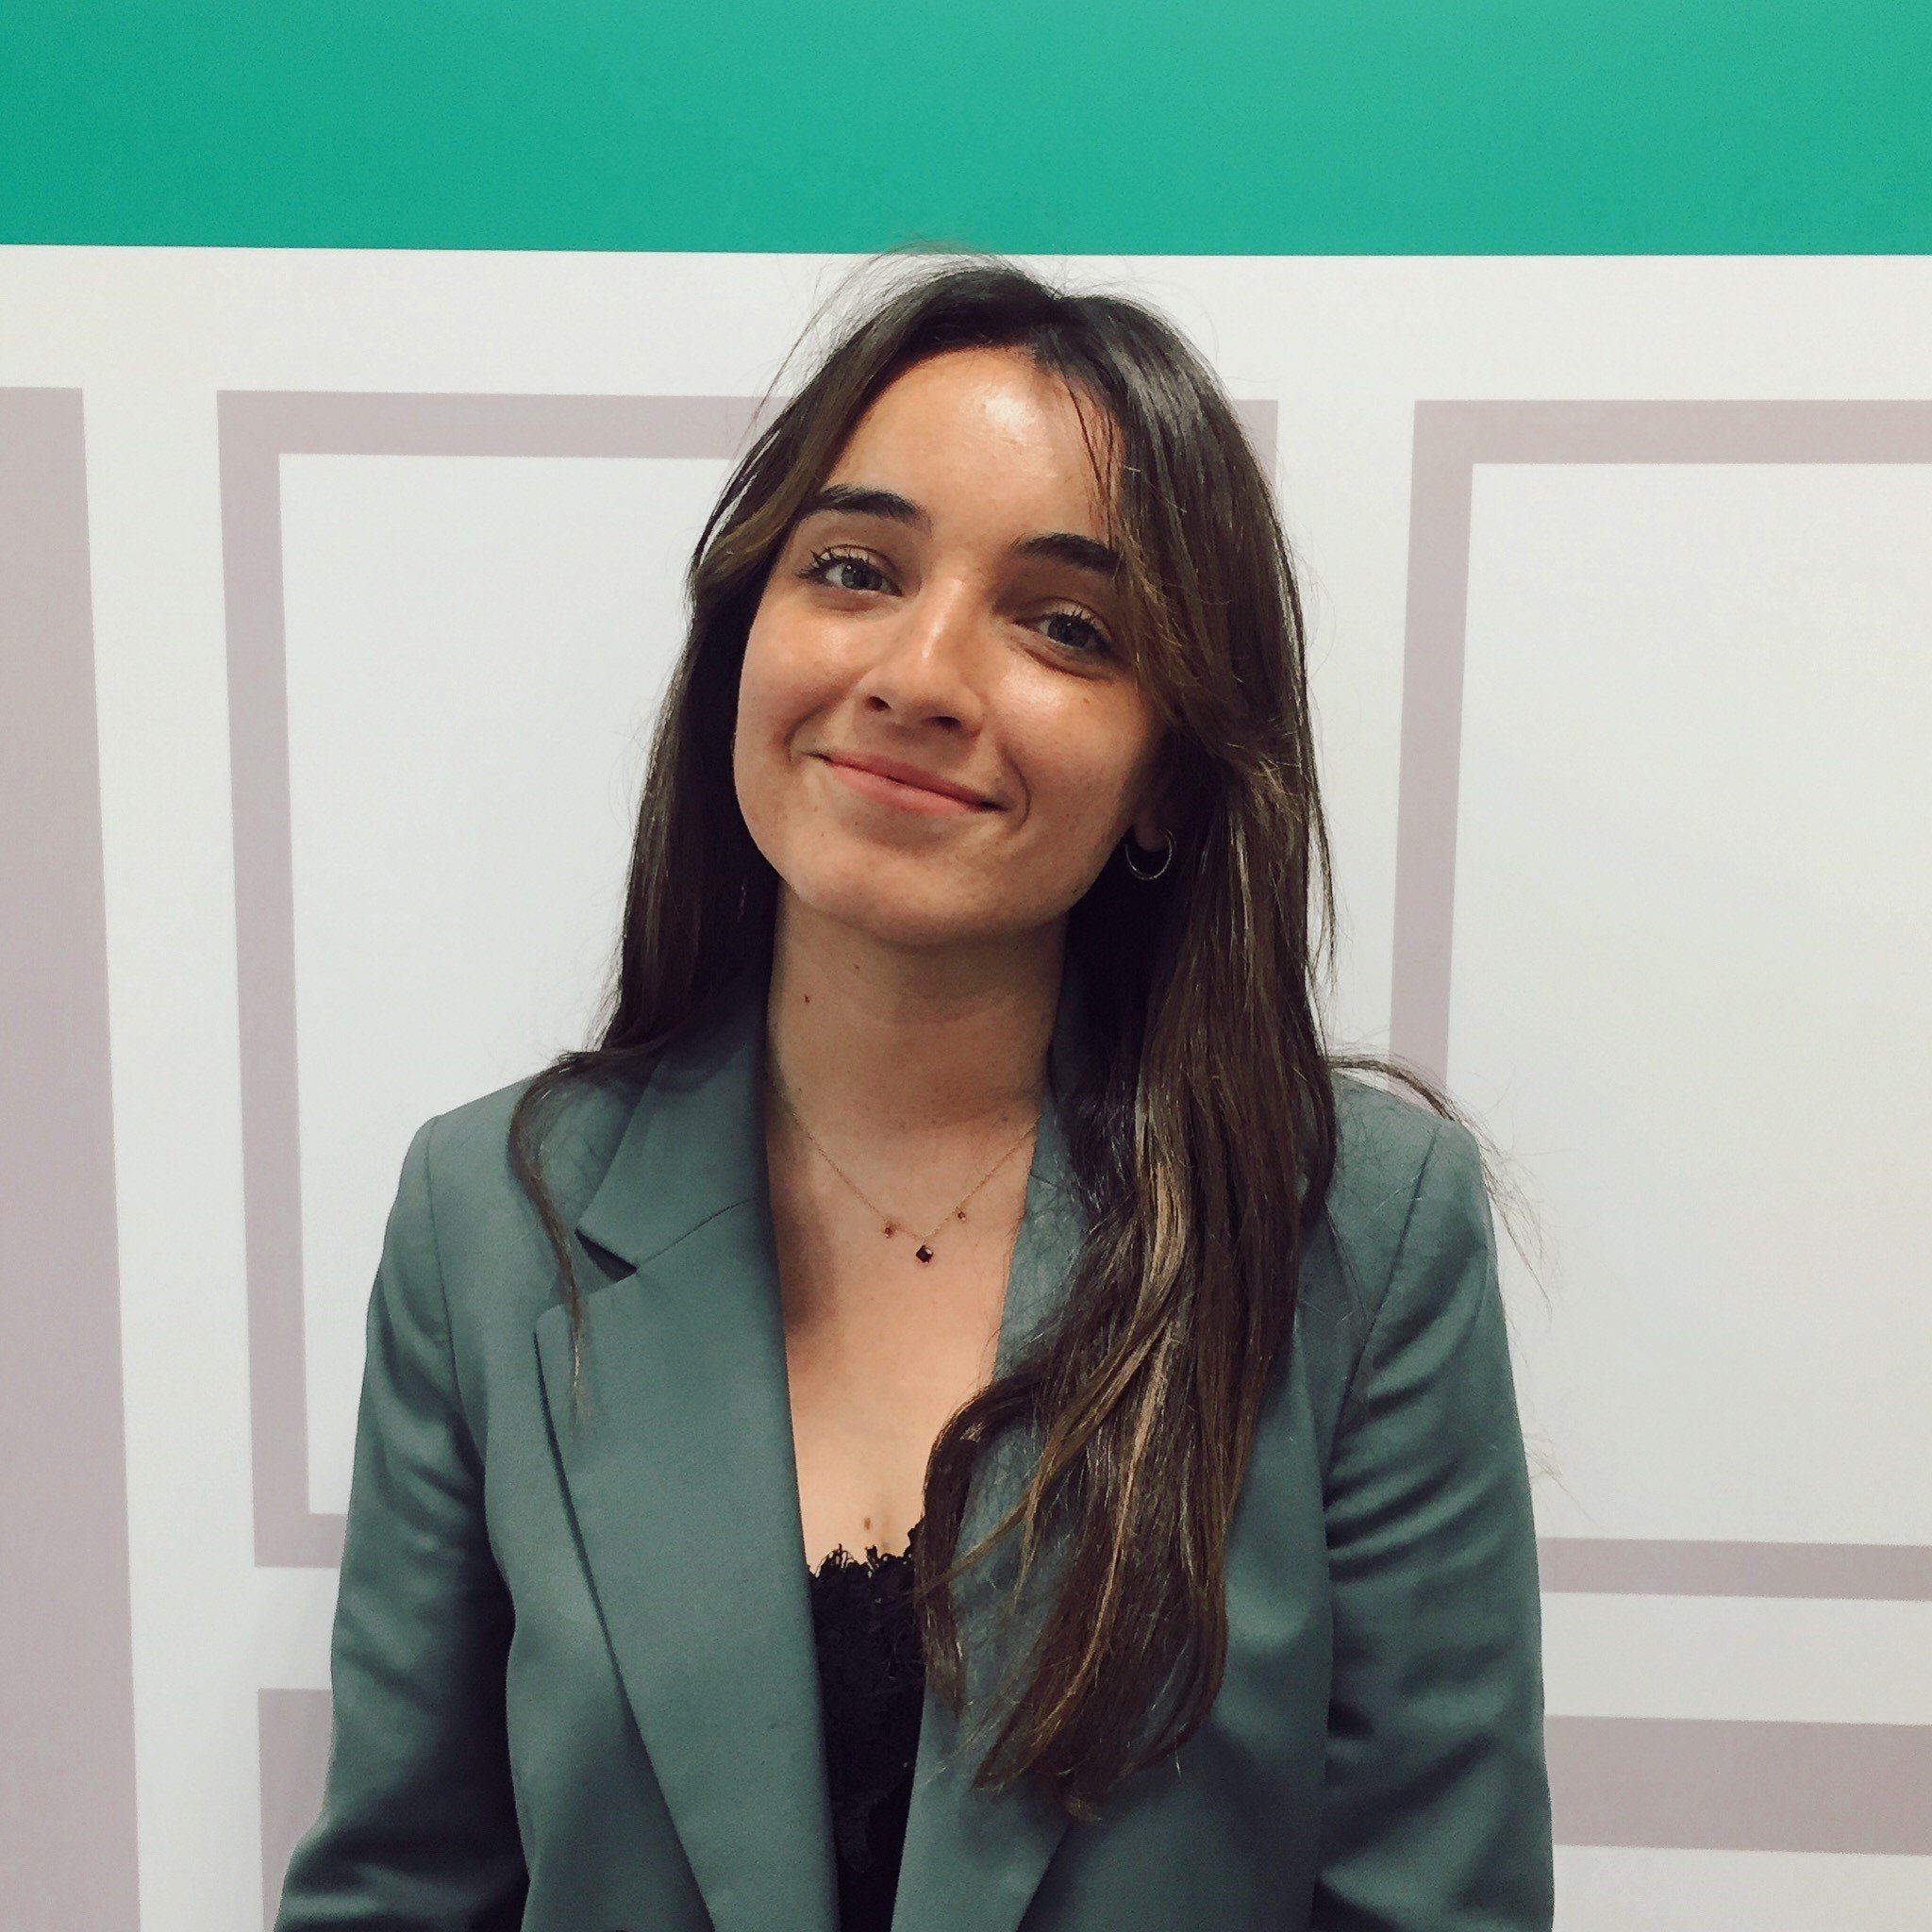 Digital & Social Marketing at @HPE_ES | I love working for a company which main goal is to improve the way people live and work.